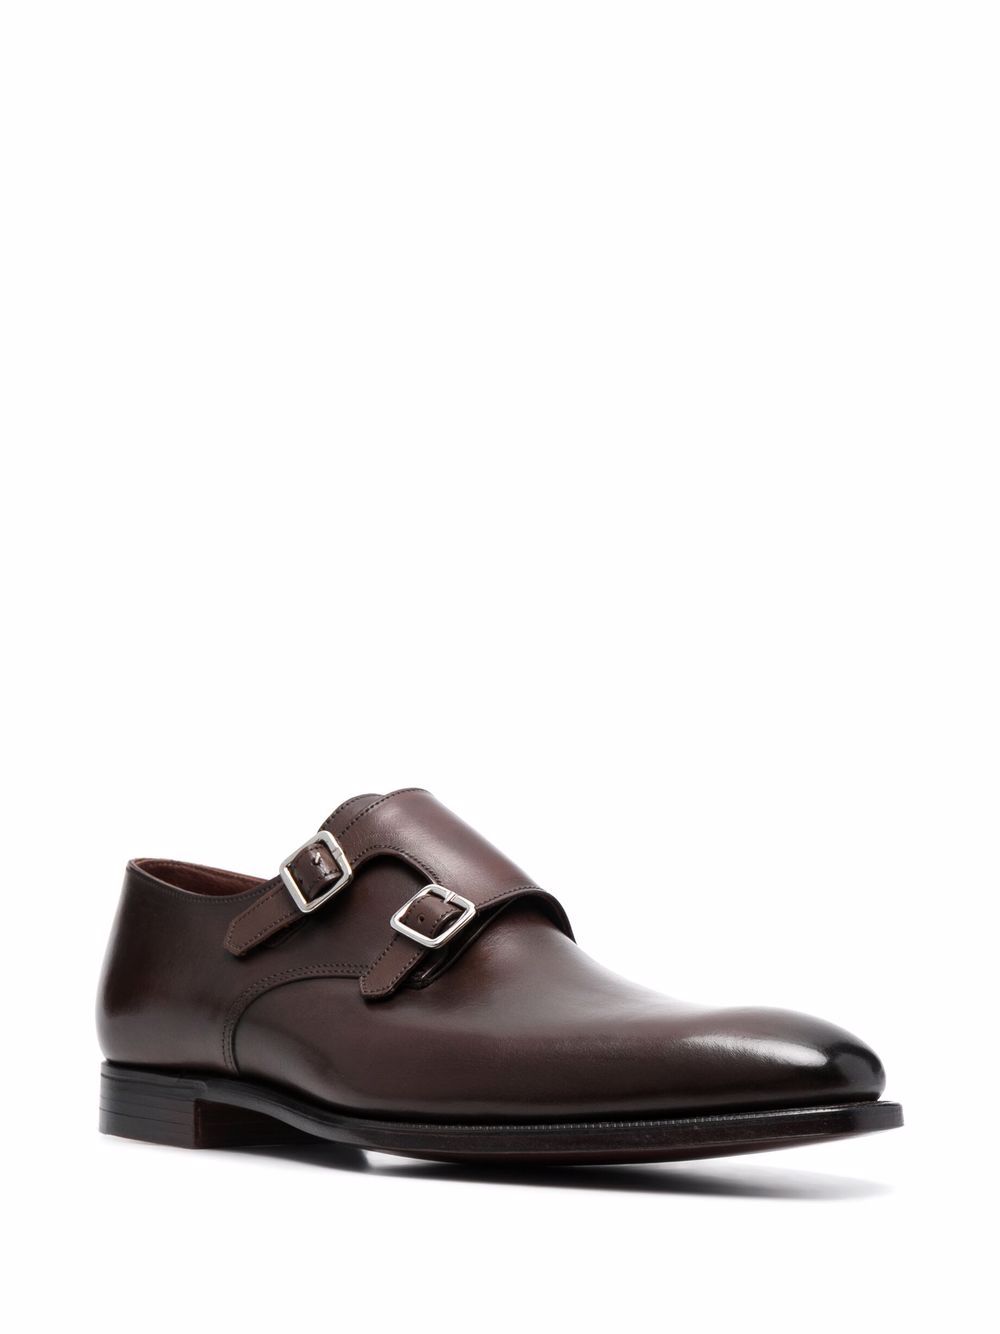 Seymour double buckle shoes